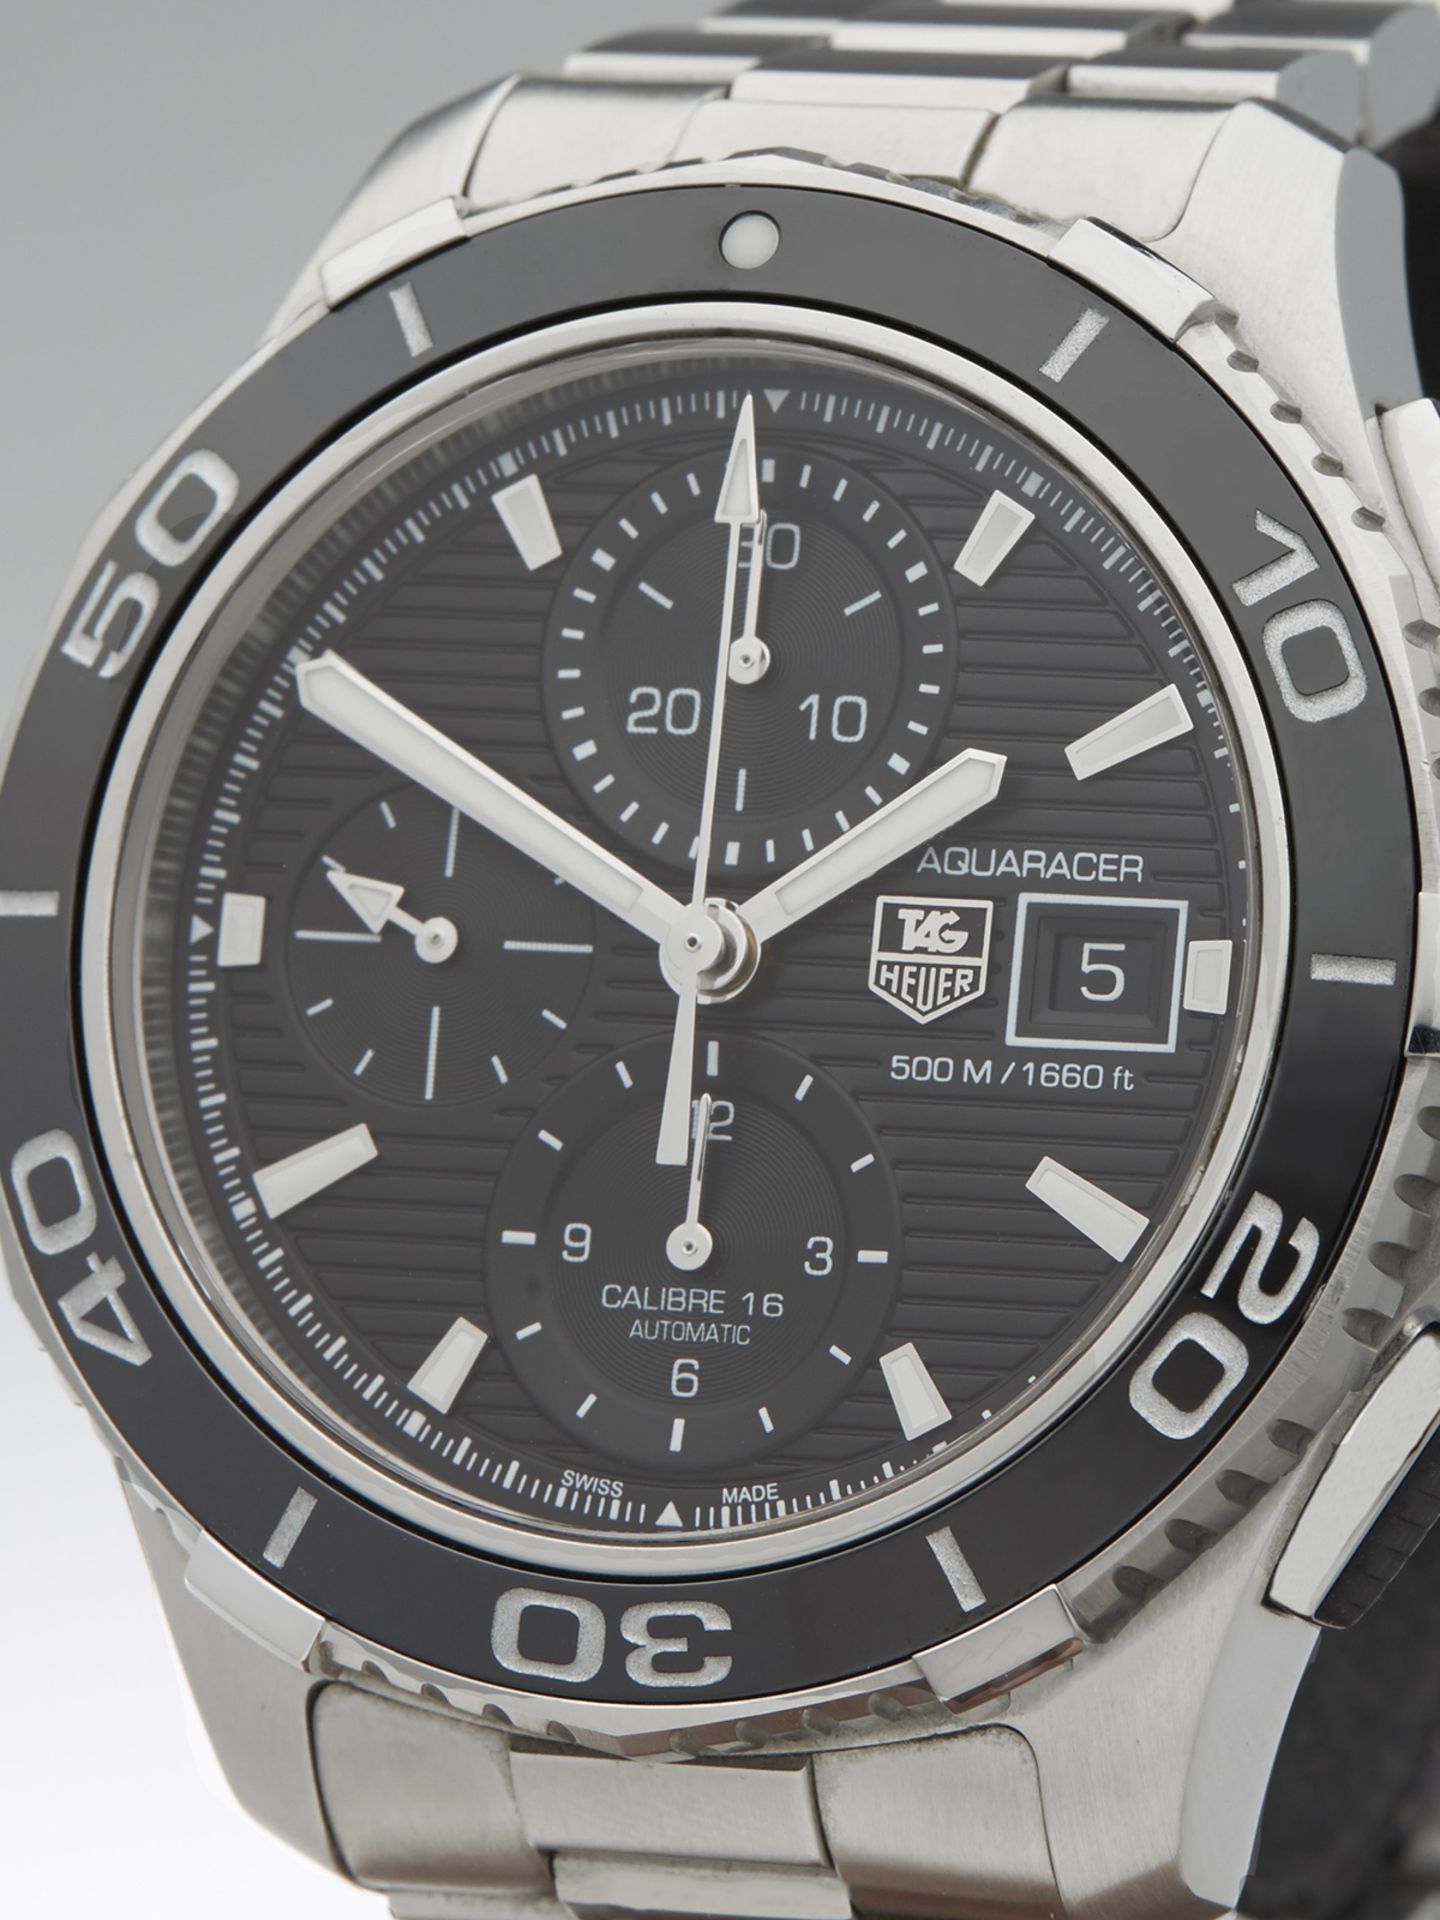 Tag Heuer Aquaracer Chronograph Ceramic 43mm Stainless Steel CAK2110.BA0833 - Image 3 of 9